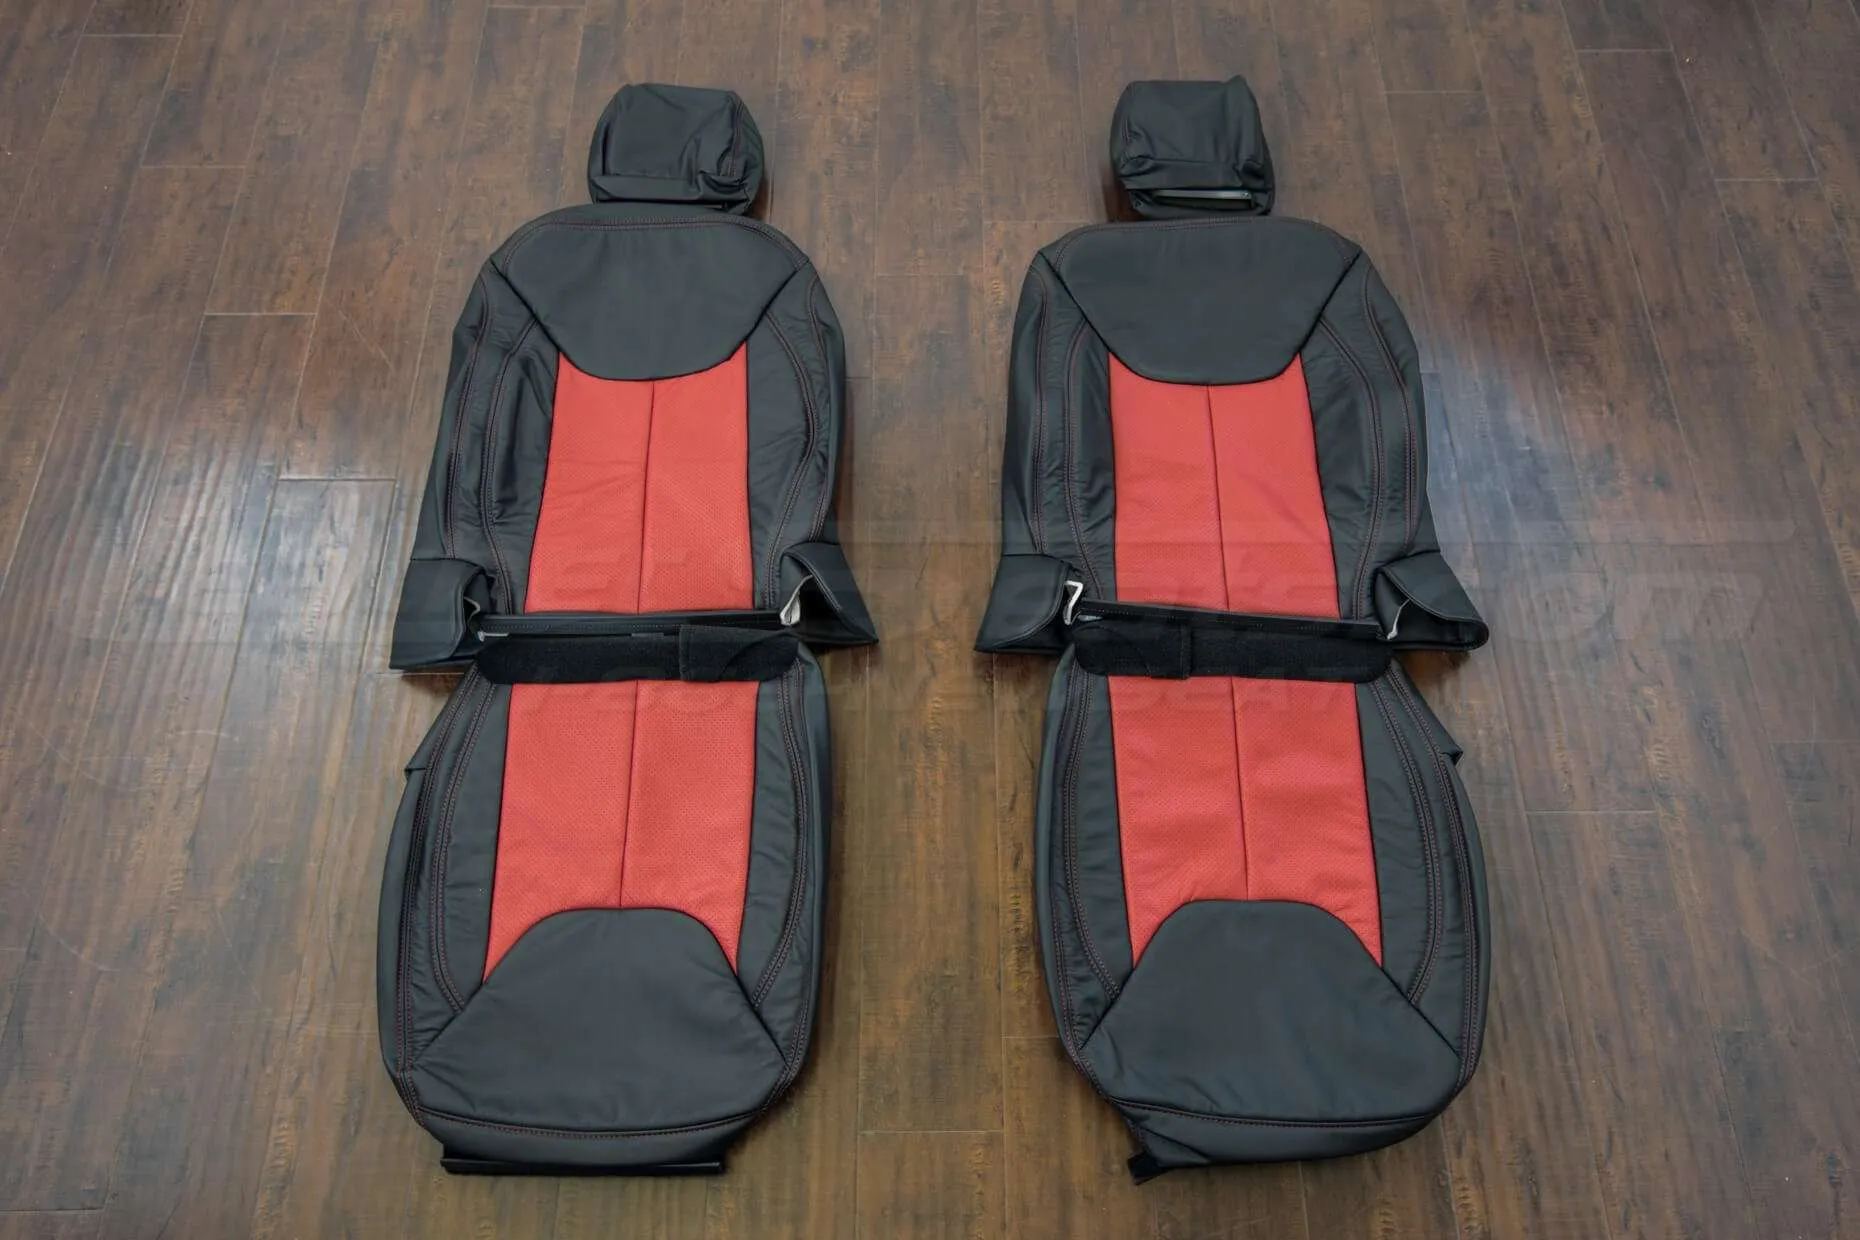 Jeep Wrangler upholstery kit - Black / Bright Red - Front seat upholstery